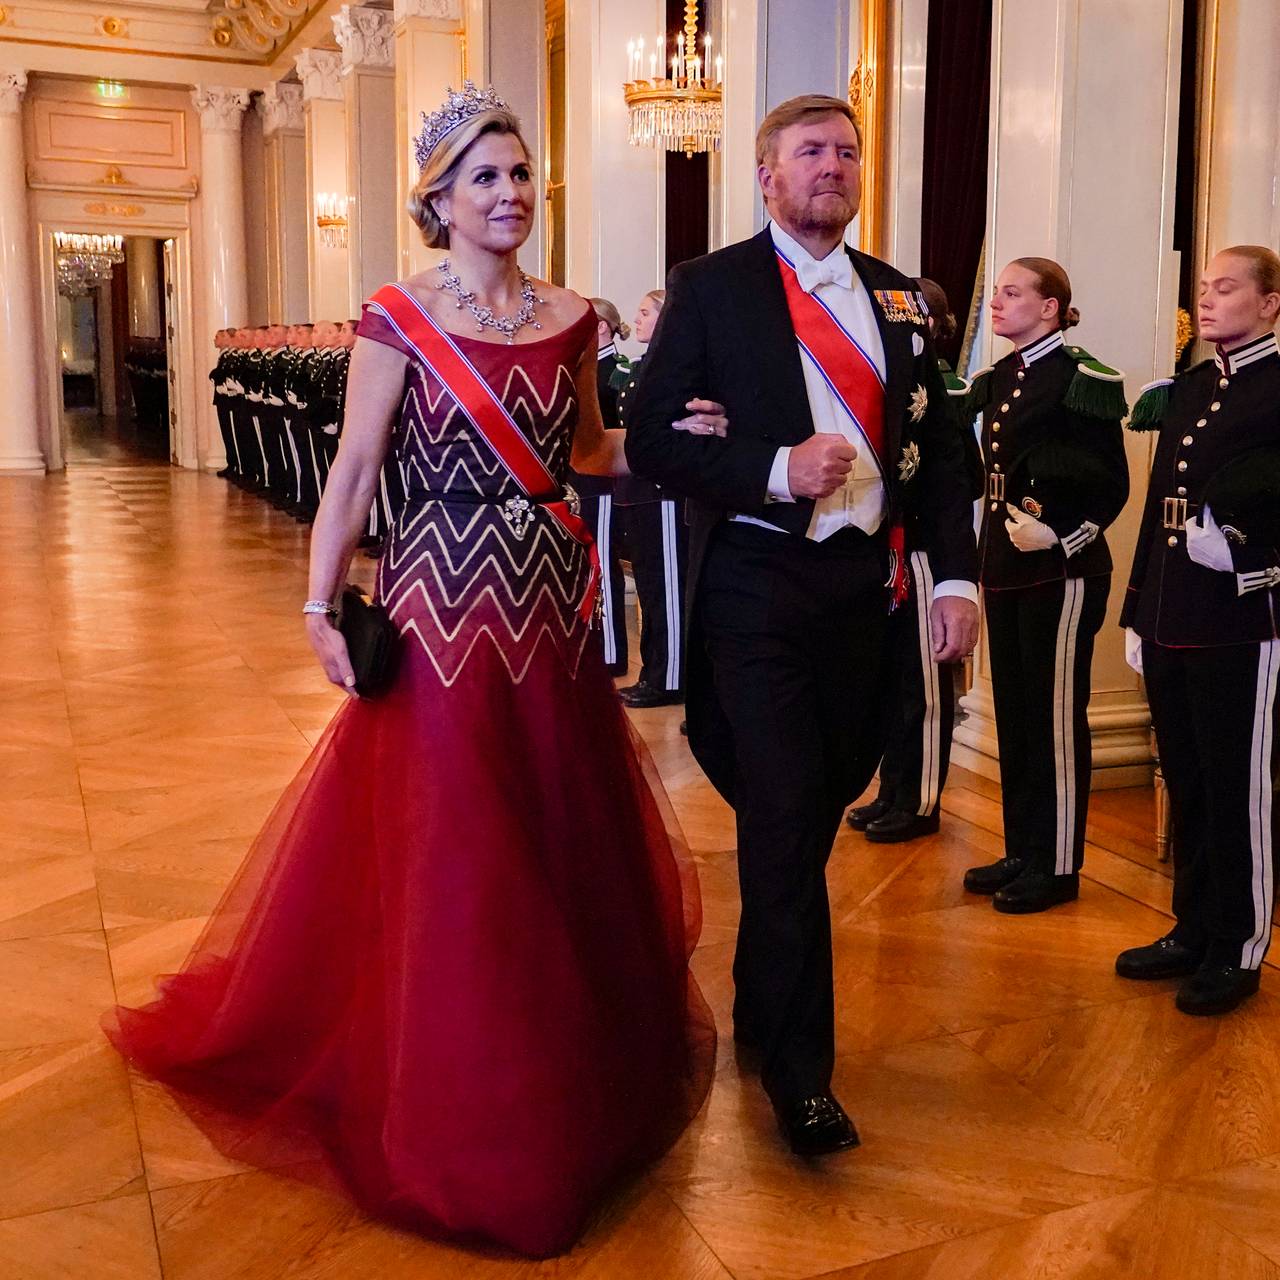 King of the Netherlands Willem-Alexander and his wife Queen Maxima.